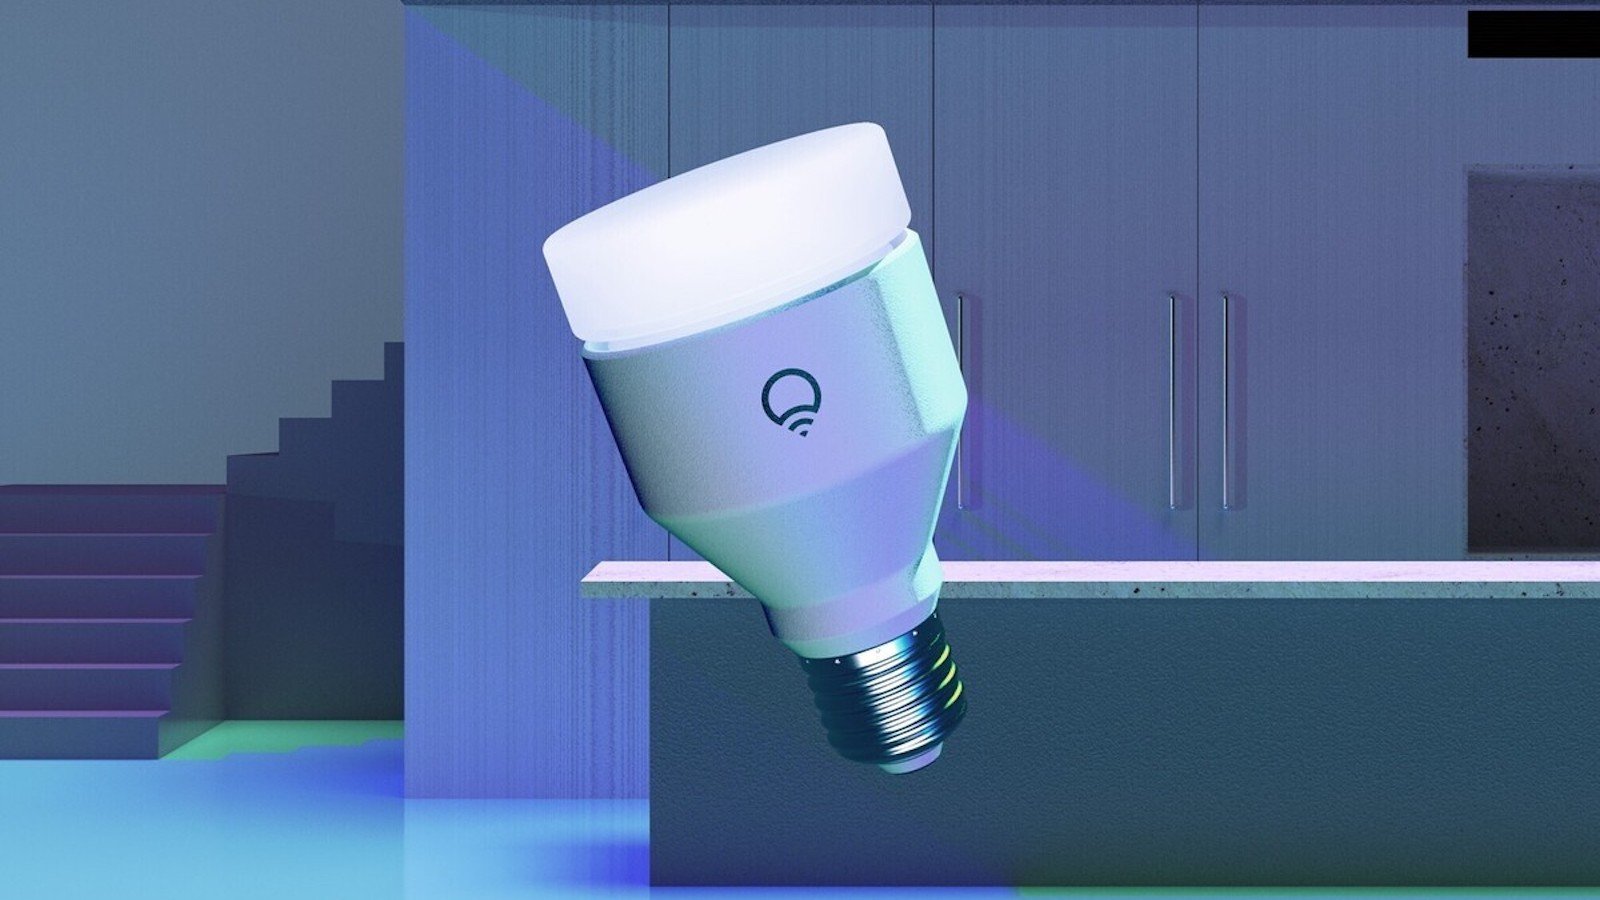 LIFX Clean antibacterial smart bulb kills bacteria to sanitize surfaces